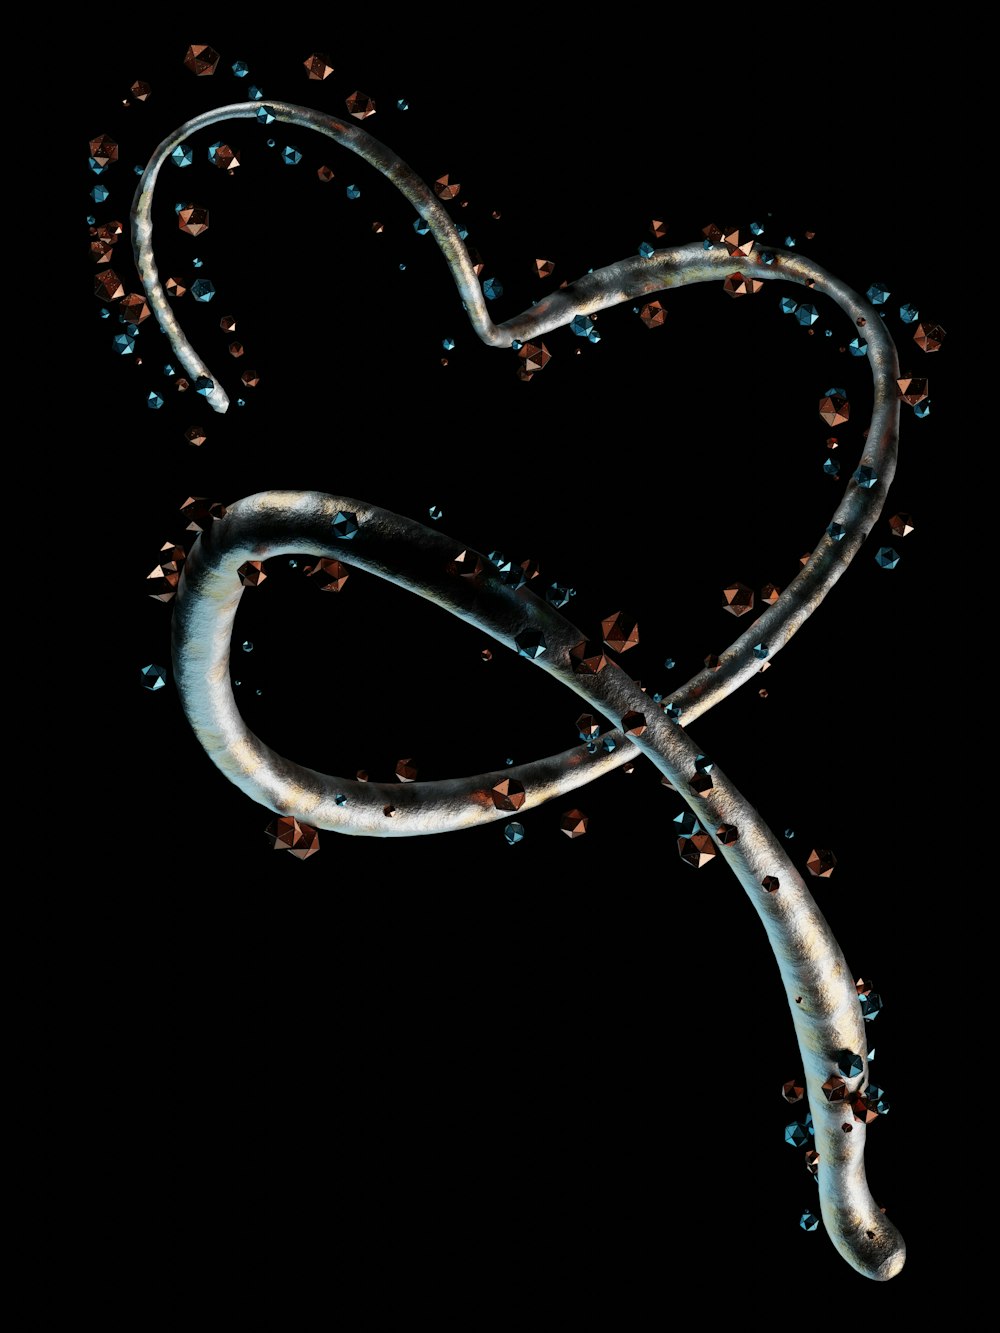 the letter s is made up of bubbles